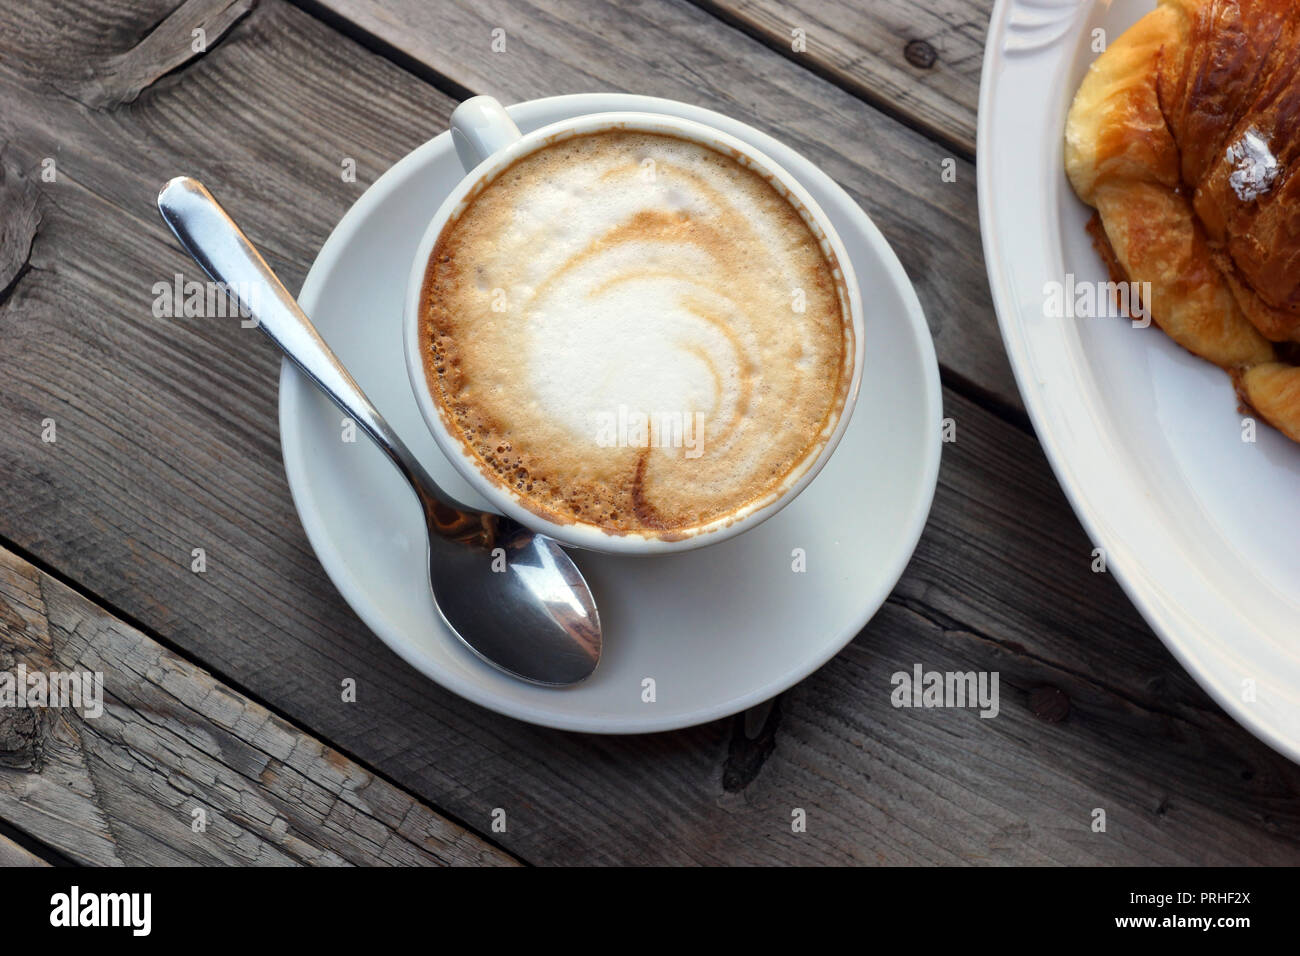 Wonderful traditional Italian breakfast. Delicious hot Italian cappuccino stands in a cup with a saucer on a wooden table. Сroissant on a plate. Stock Photo